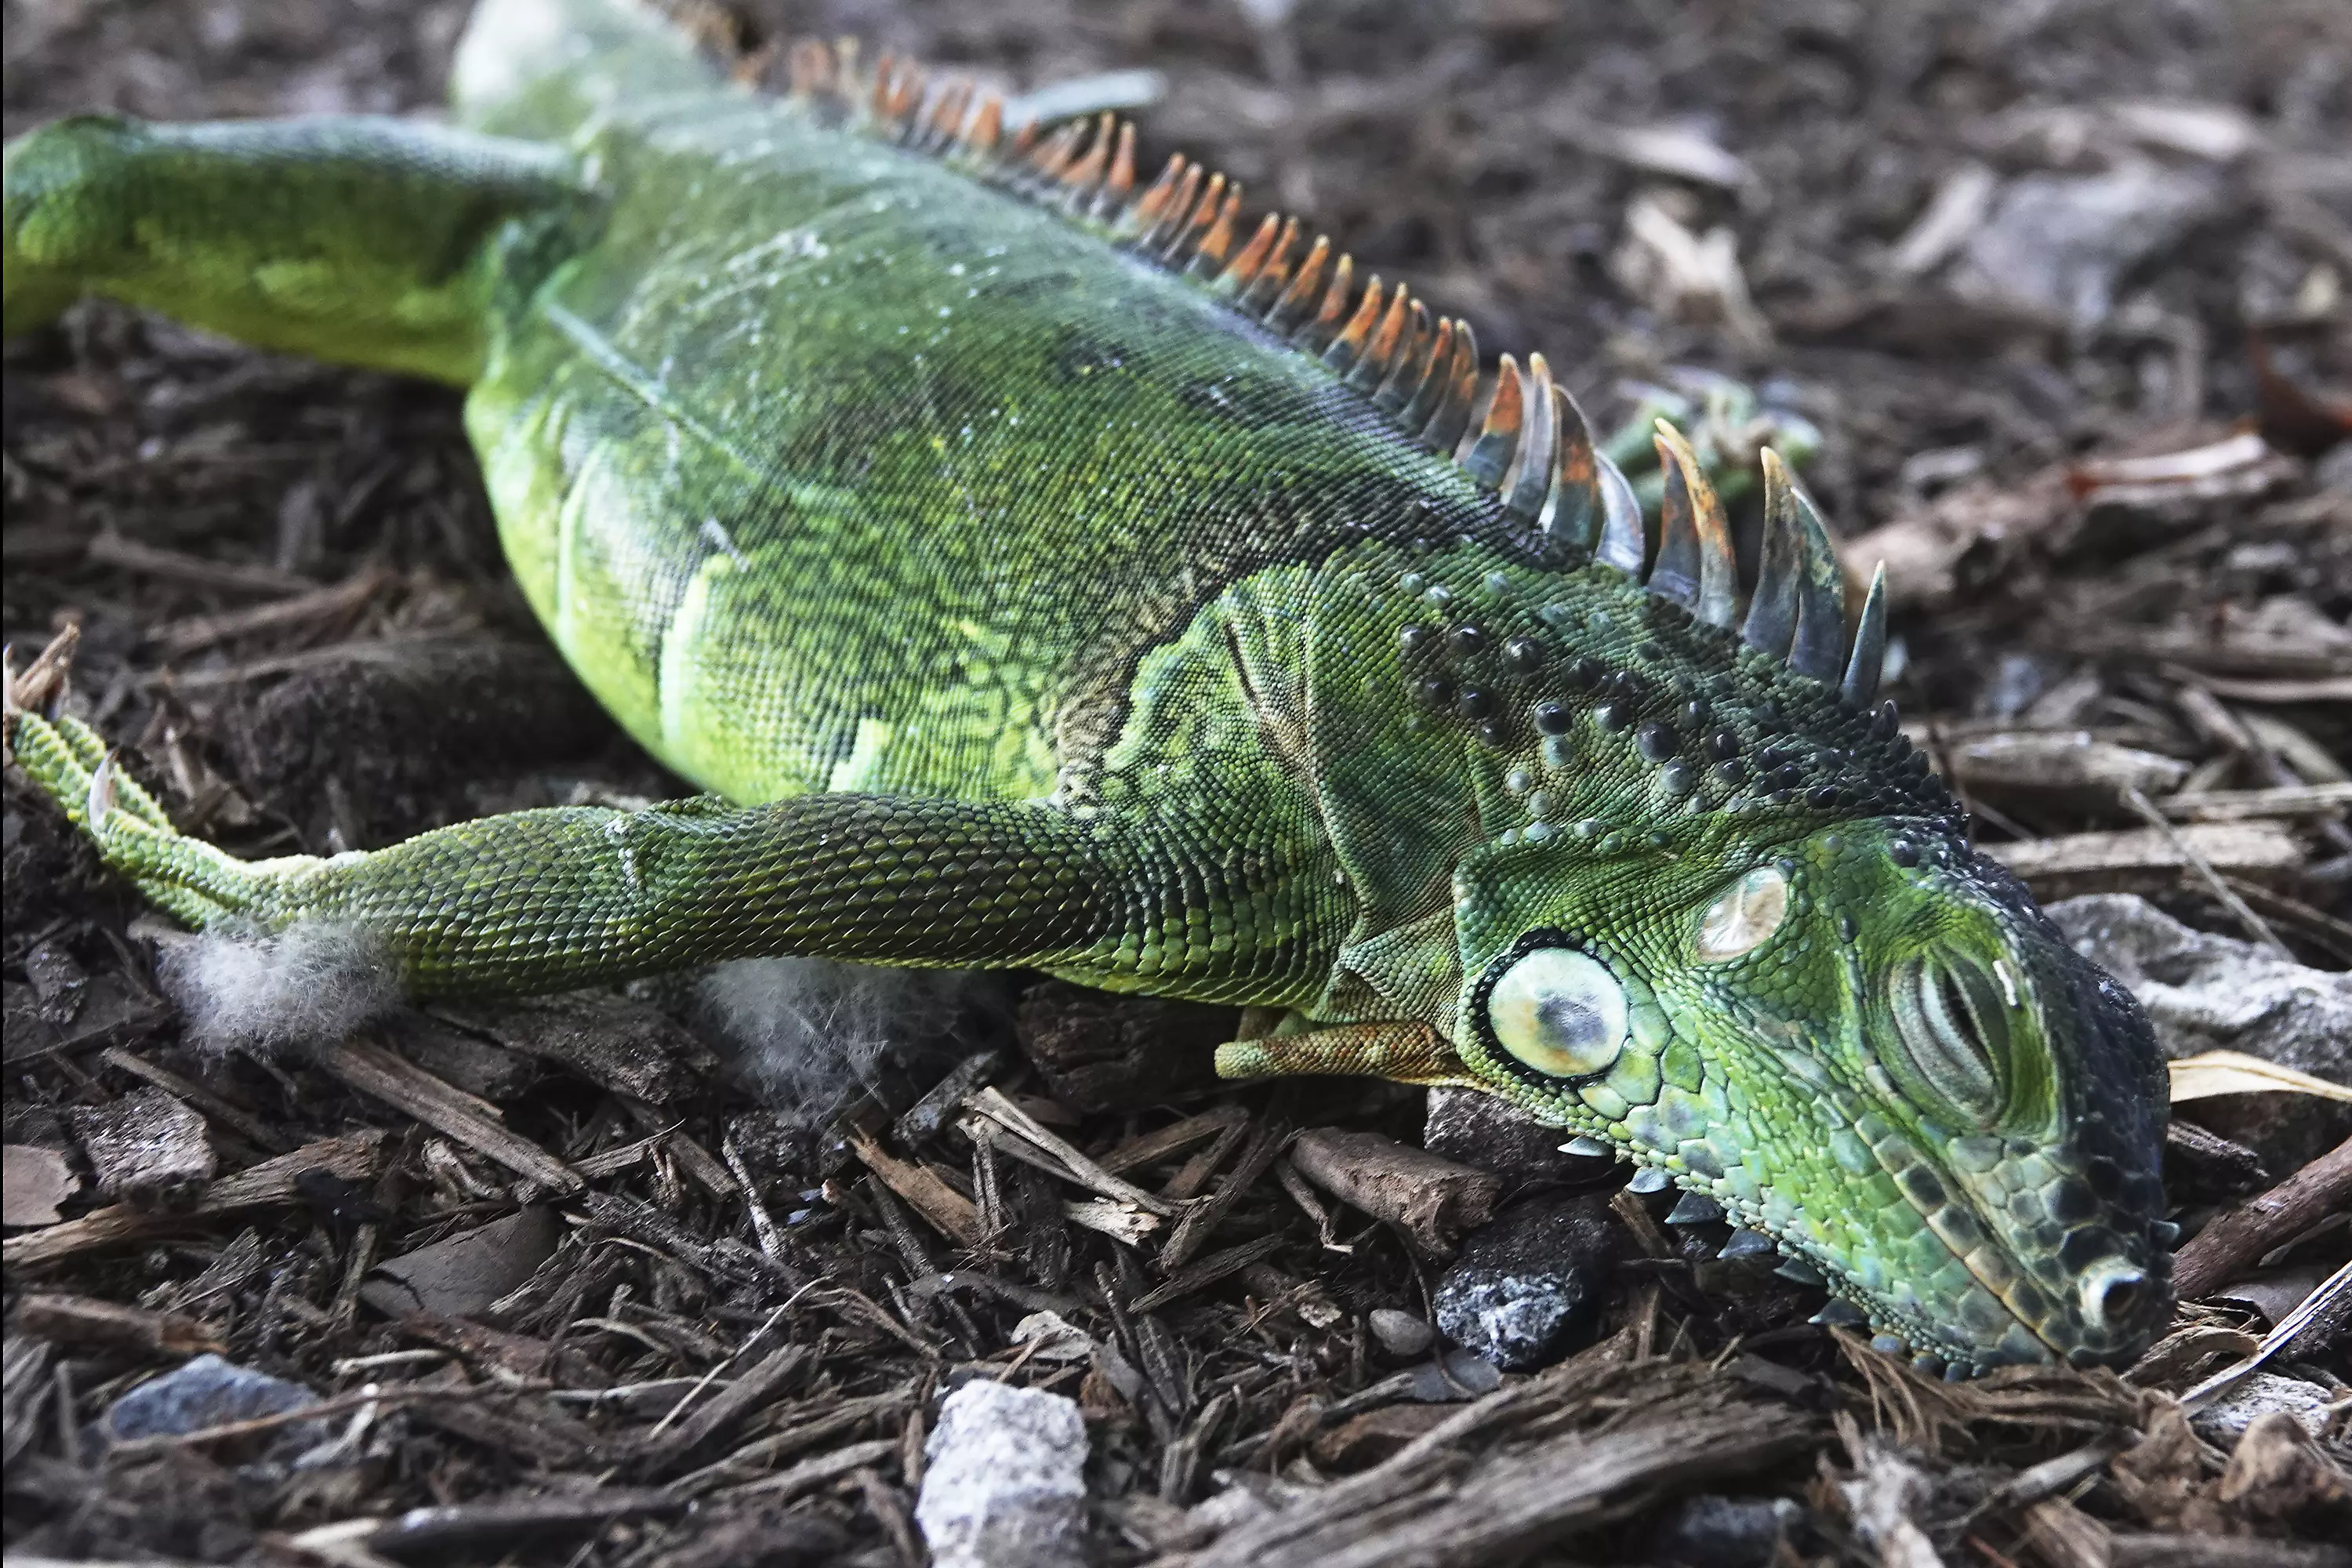 The low temperatures could cause iguanas in South Florida to become dormant, appearing to be dead.